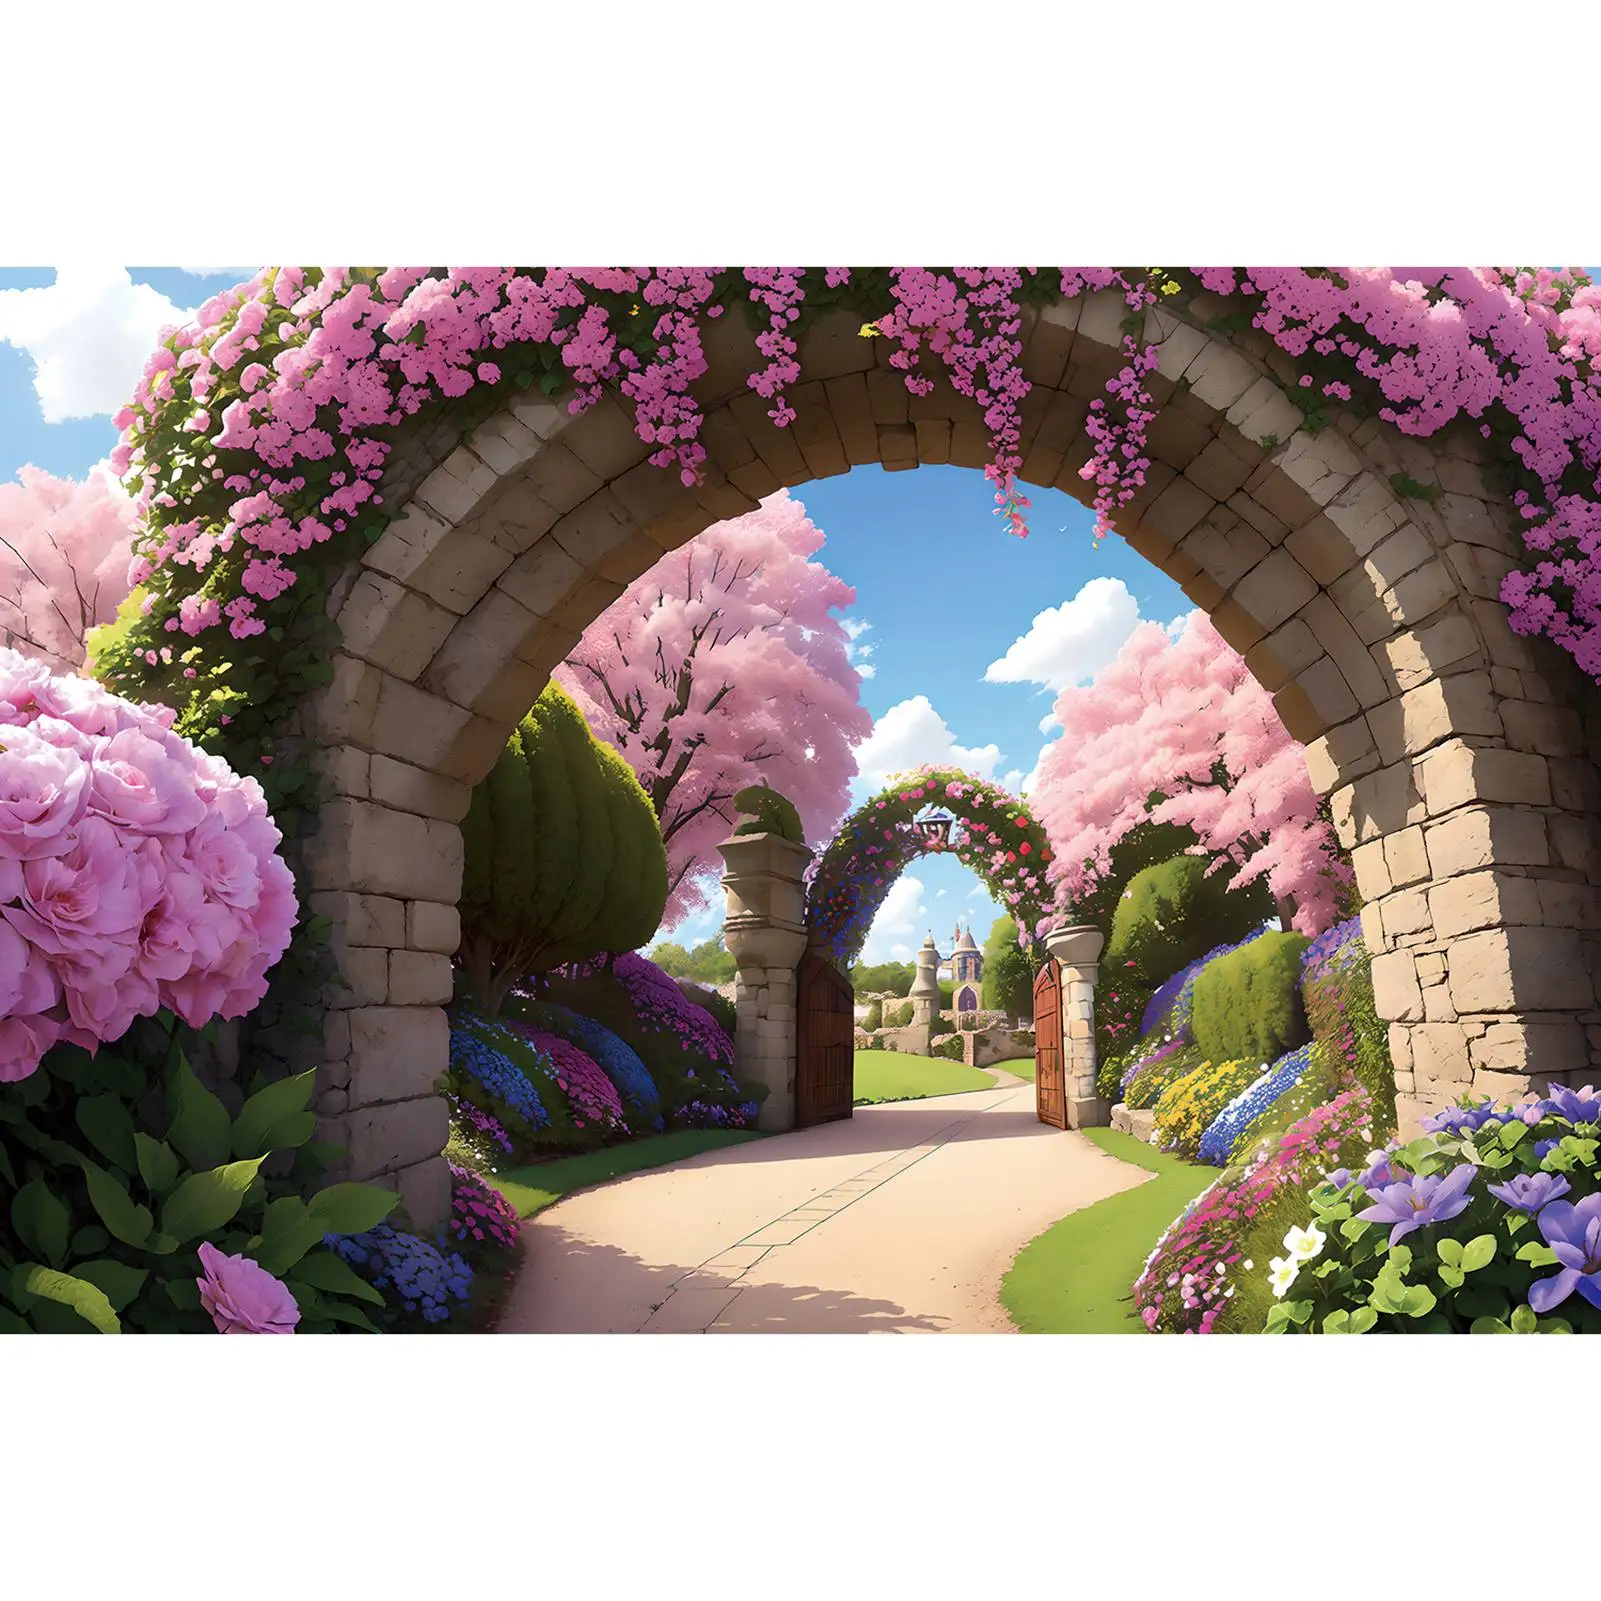 

Pink Garden Flowers Backdrops Photography Girls Spring Fresh Floral Arch Door Wall Home Studios Birthday Party Photo Backgrounds